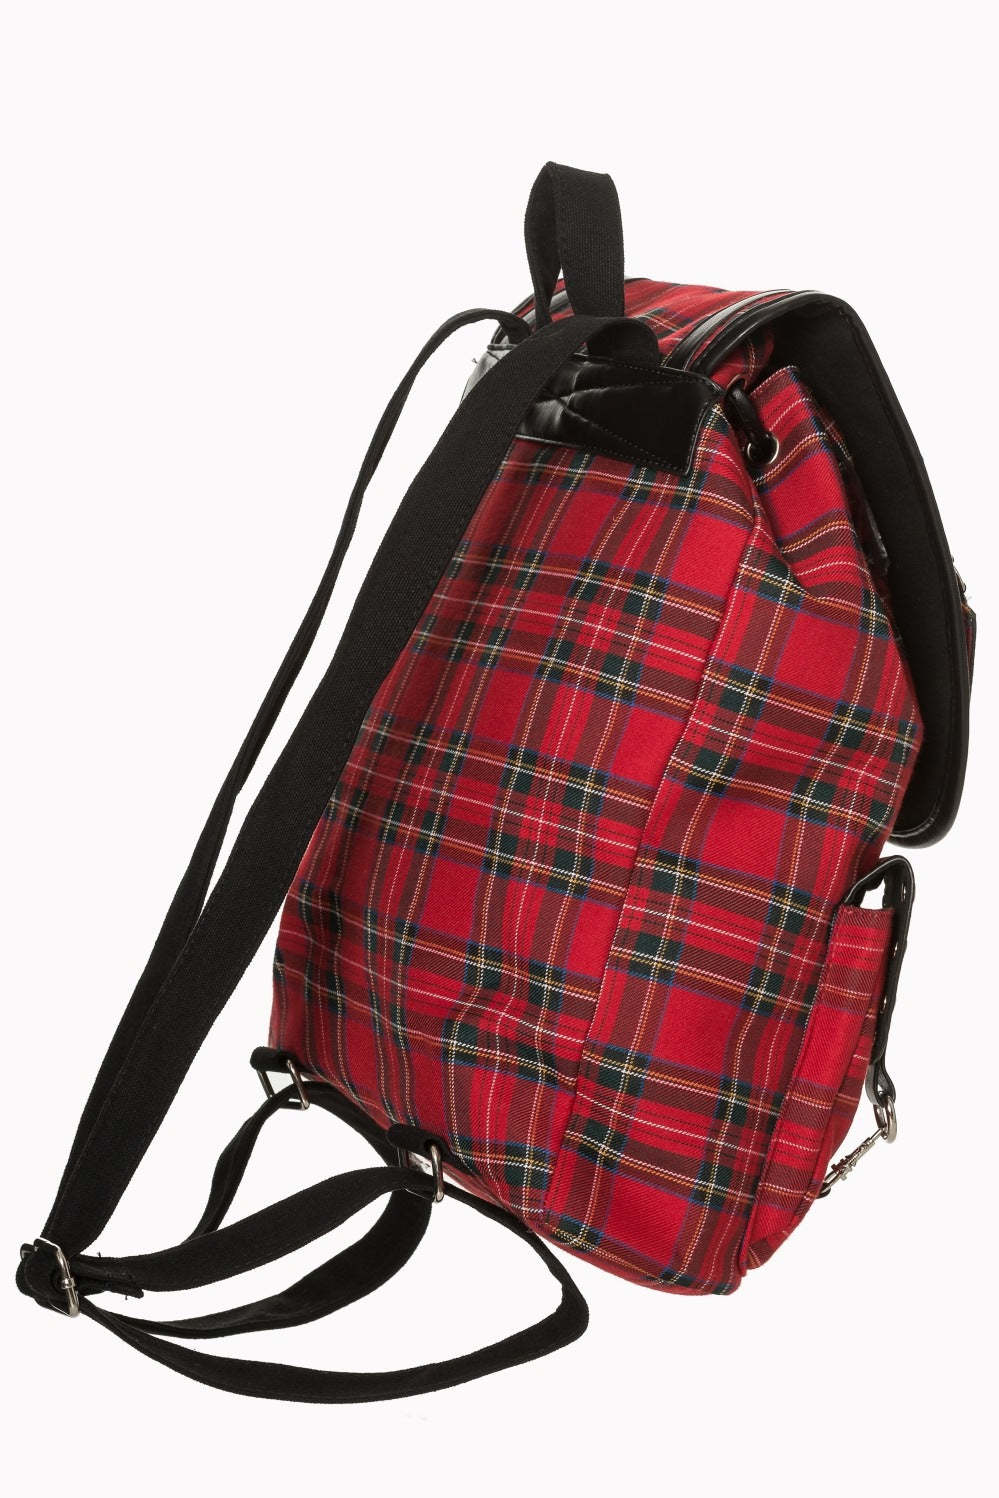 Lost Queen London's "Yamy" Backpack – Punk's Not Dead Red Tartan Edition